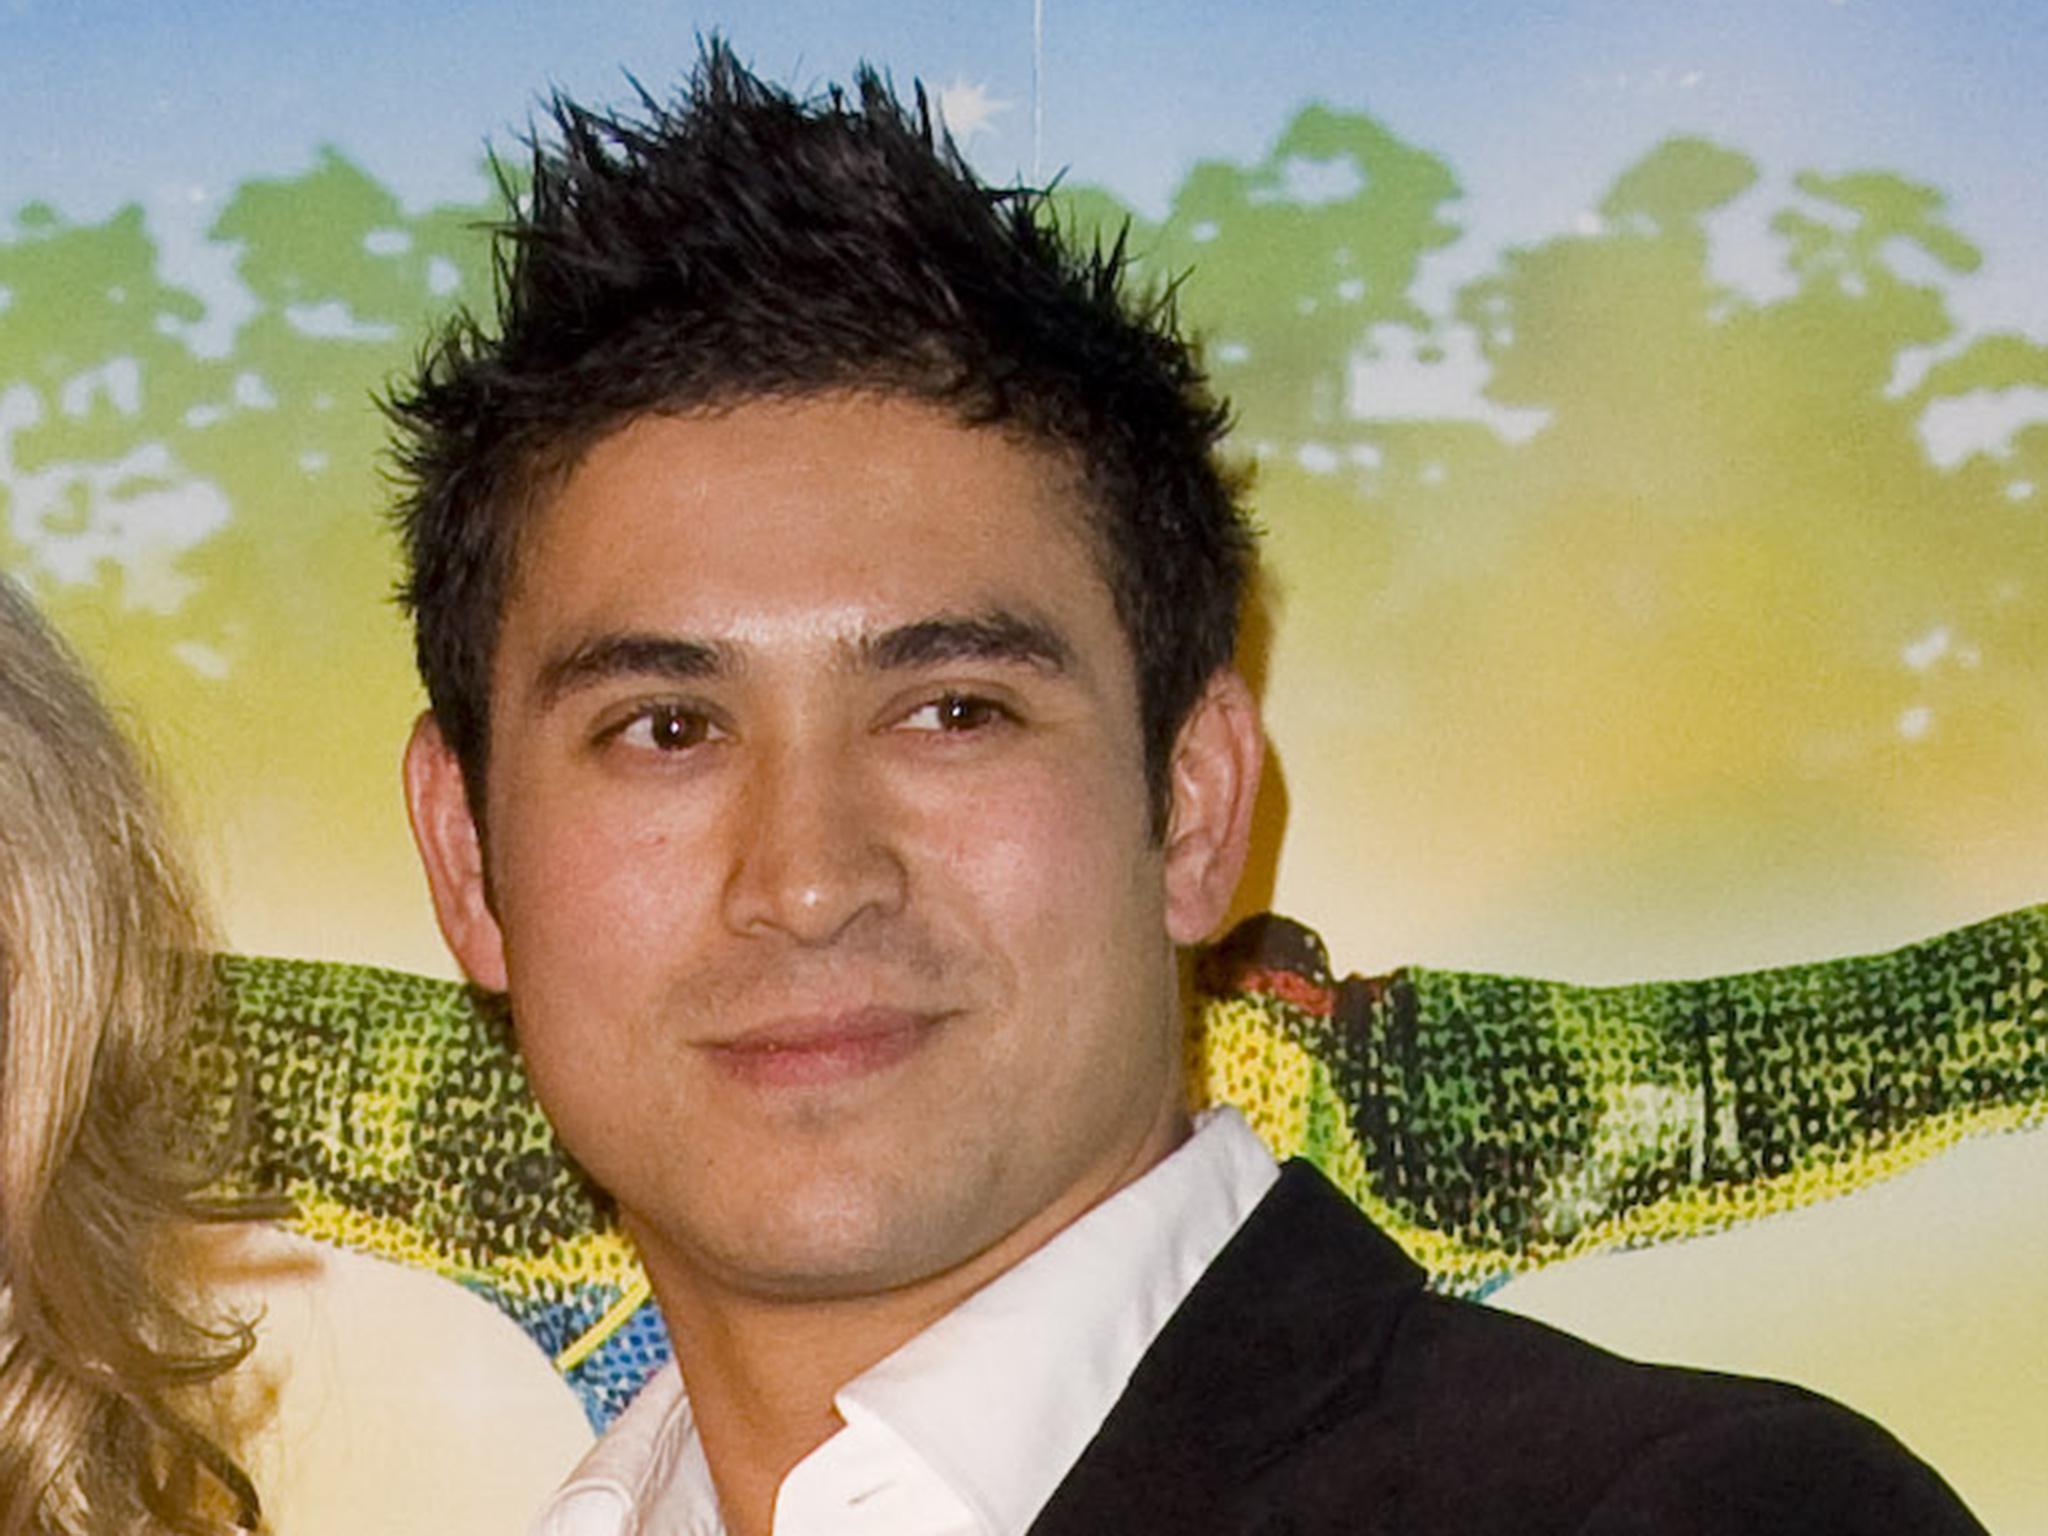 Rav Wilding left Crimewatch after seven years on the BBC1 show in 2011